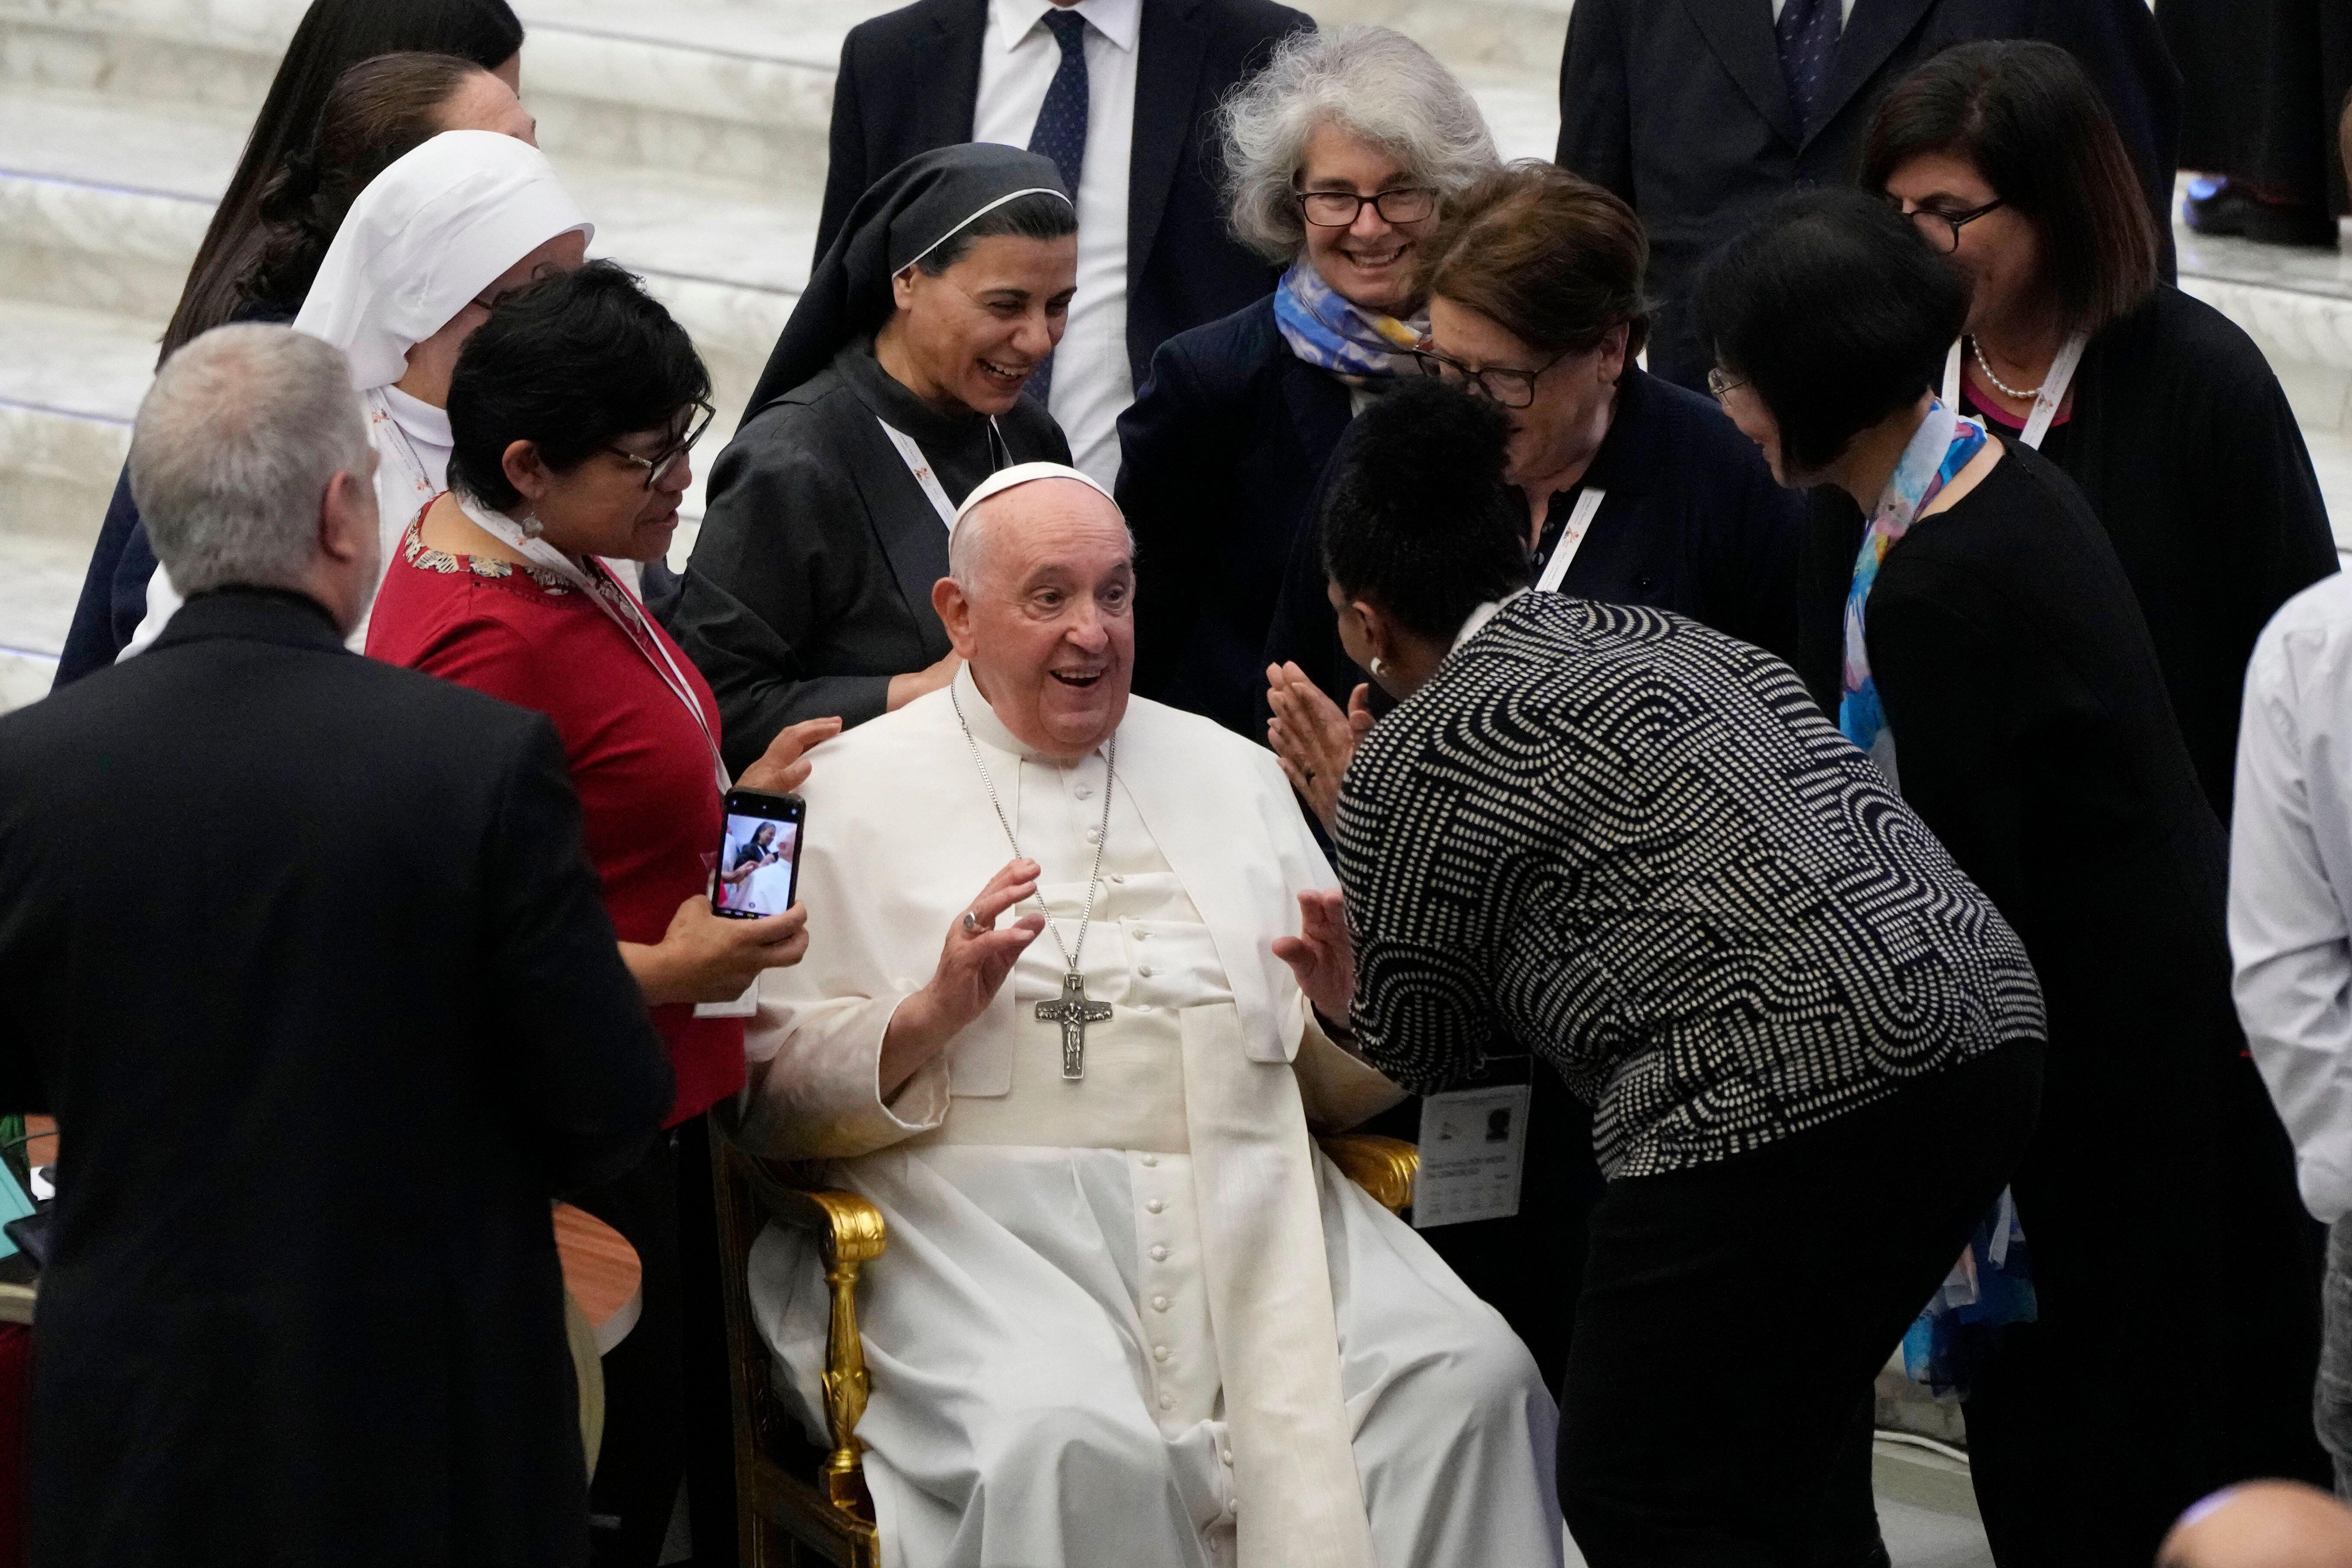 Pope Francis among those calling for women’s contributions to society to be recognised